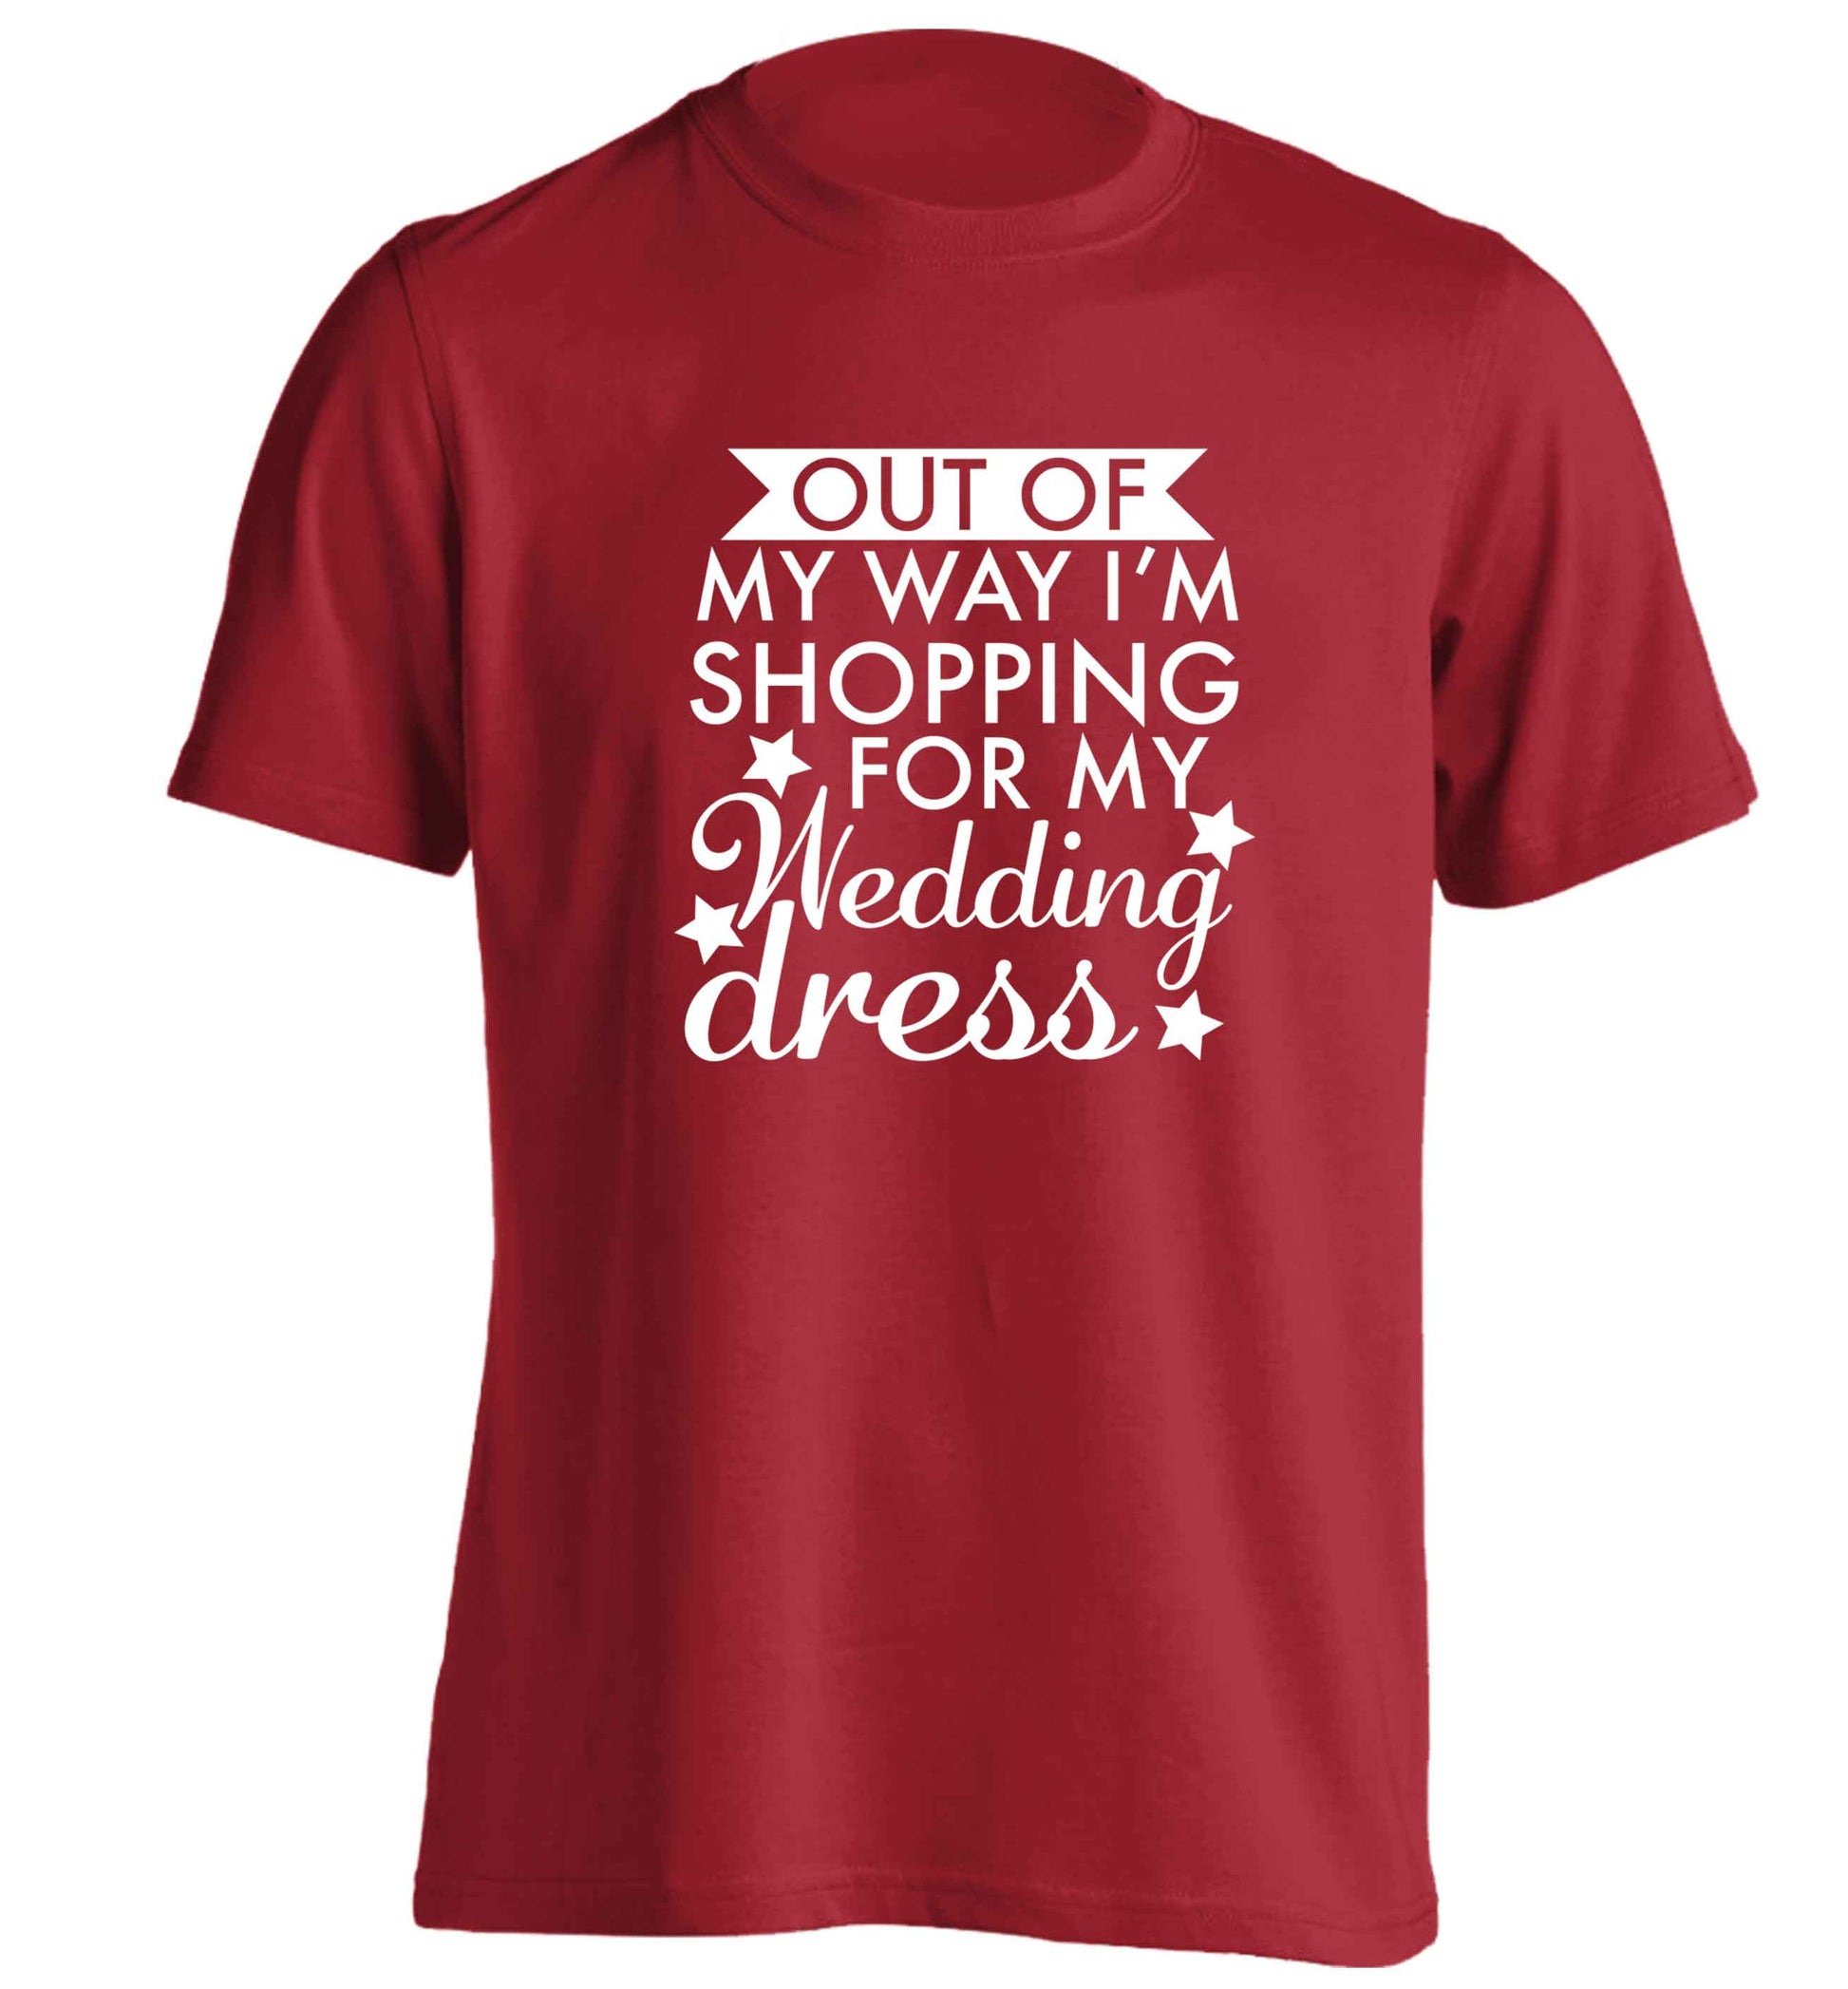 Out of my way I'm shopping for my wedding dress adults unisex red Tshirt 2XL